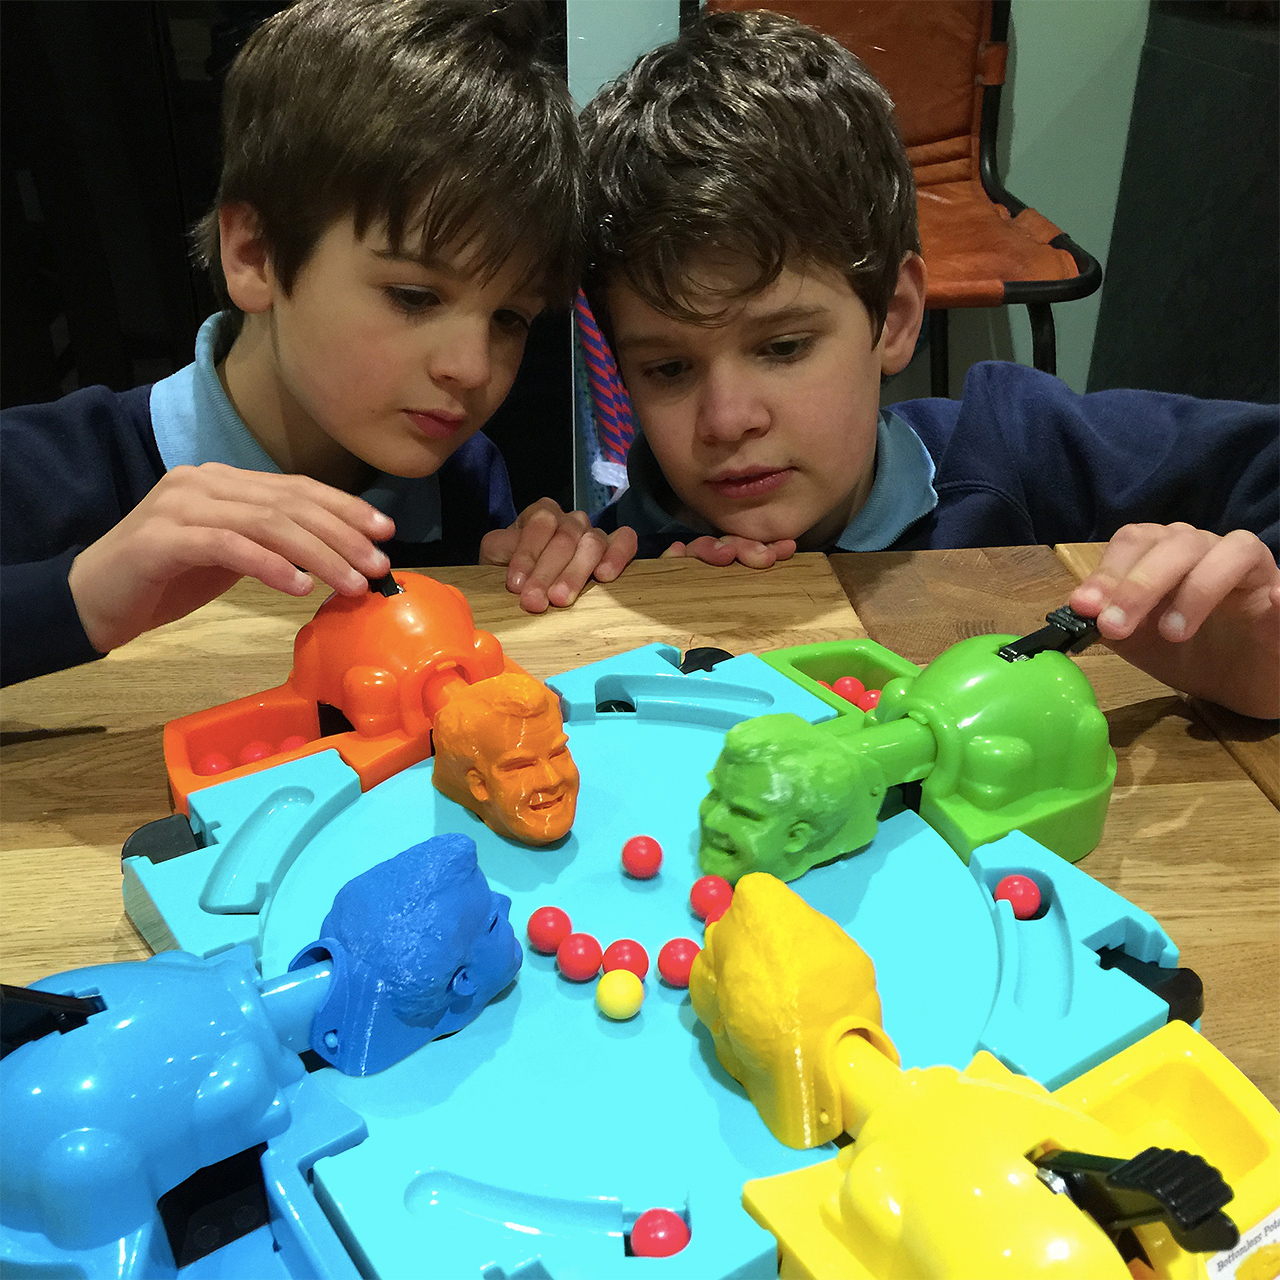 You Can Play Hungry Hungry Hippos With 3D-Printed Jeremy Clarkson Heads